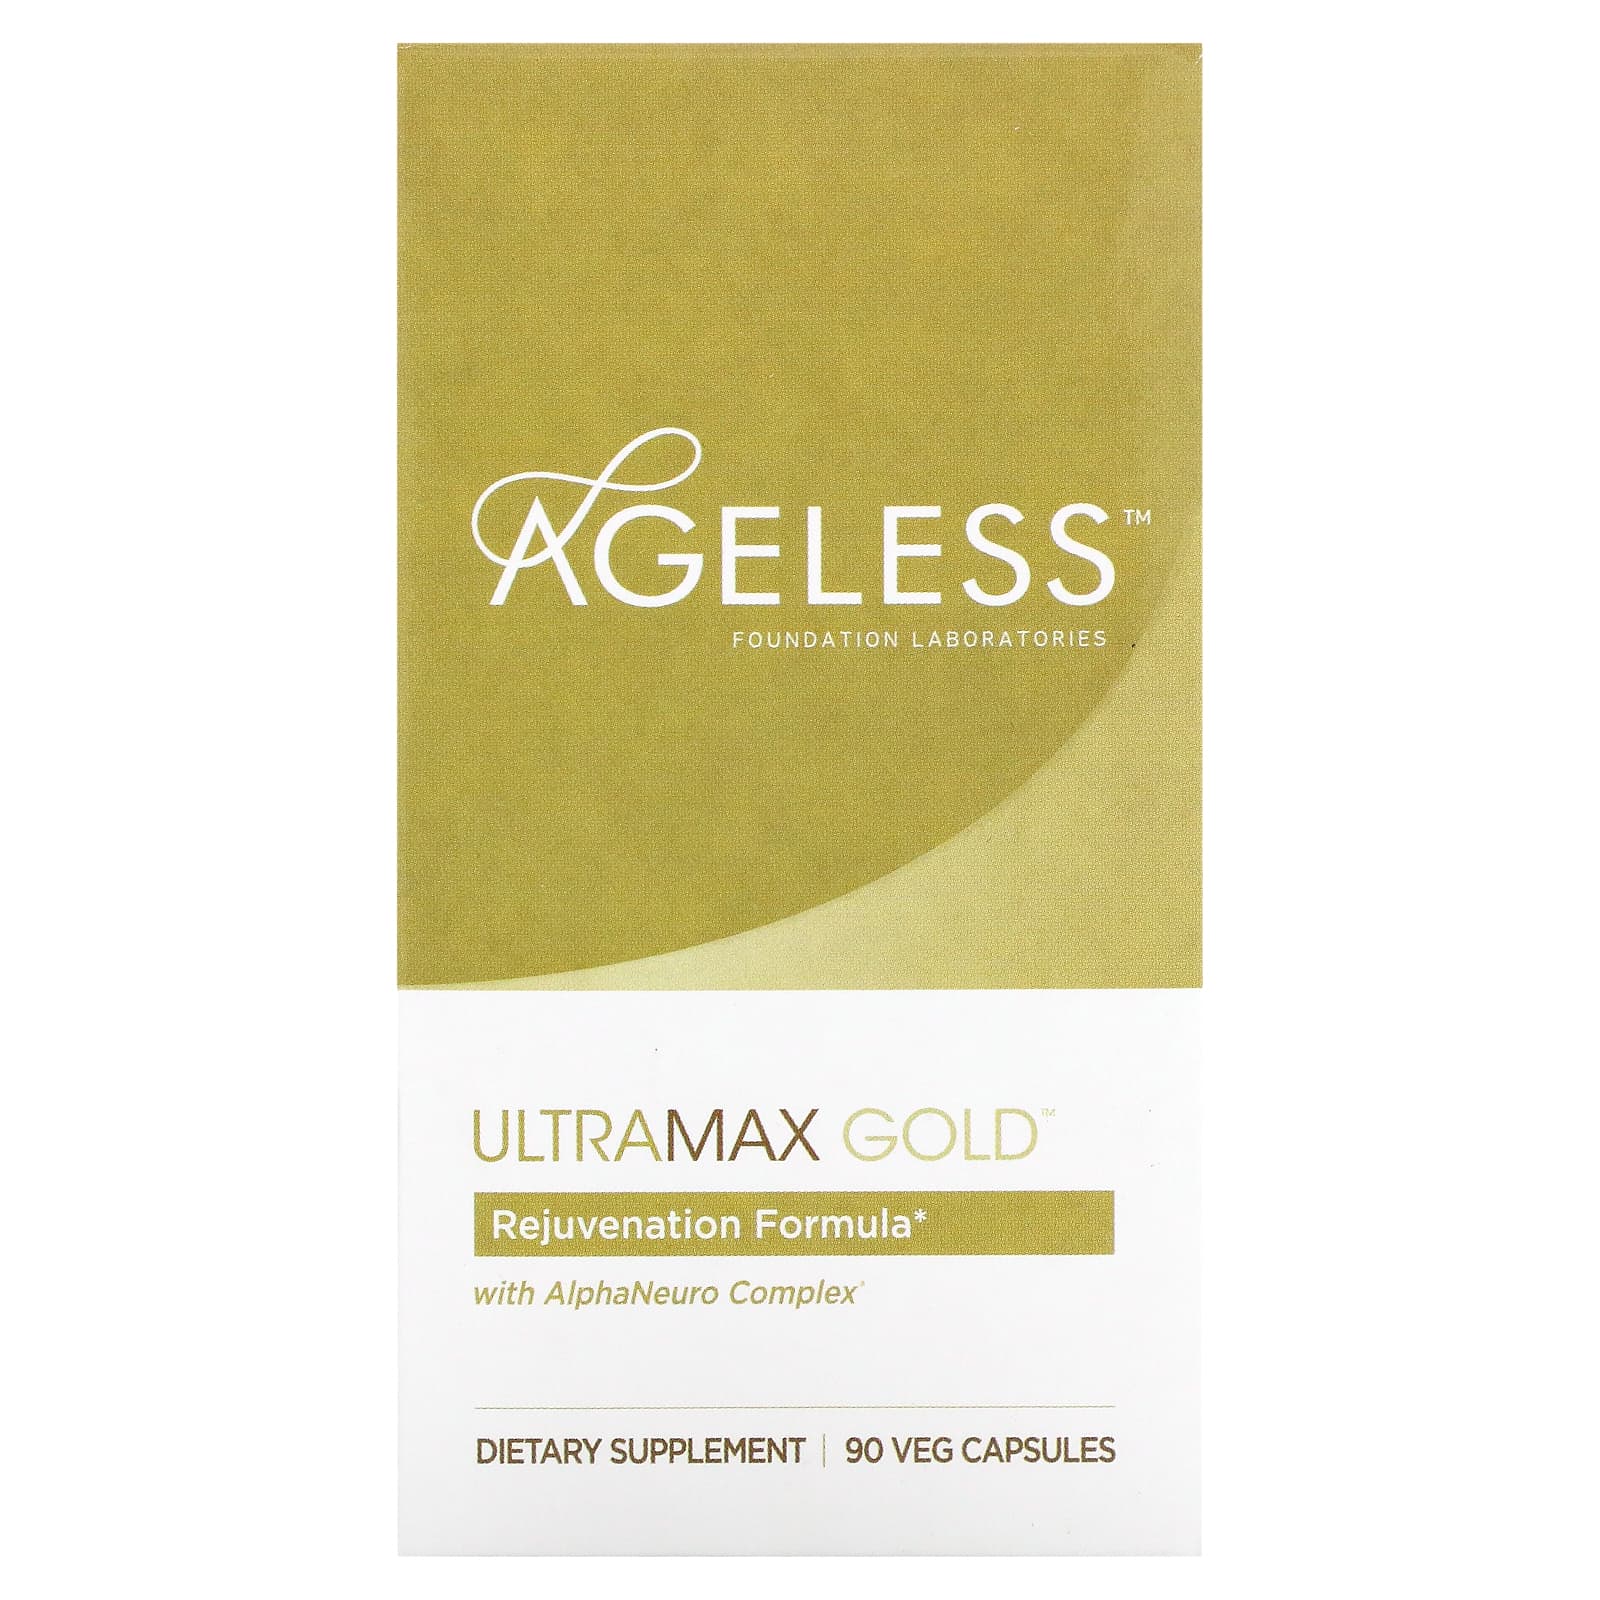 Ageless Foundation Laboratories UltraMax Gold with AlphaNeuro Complex 90 Veg Capsules